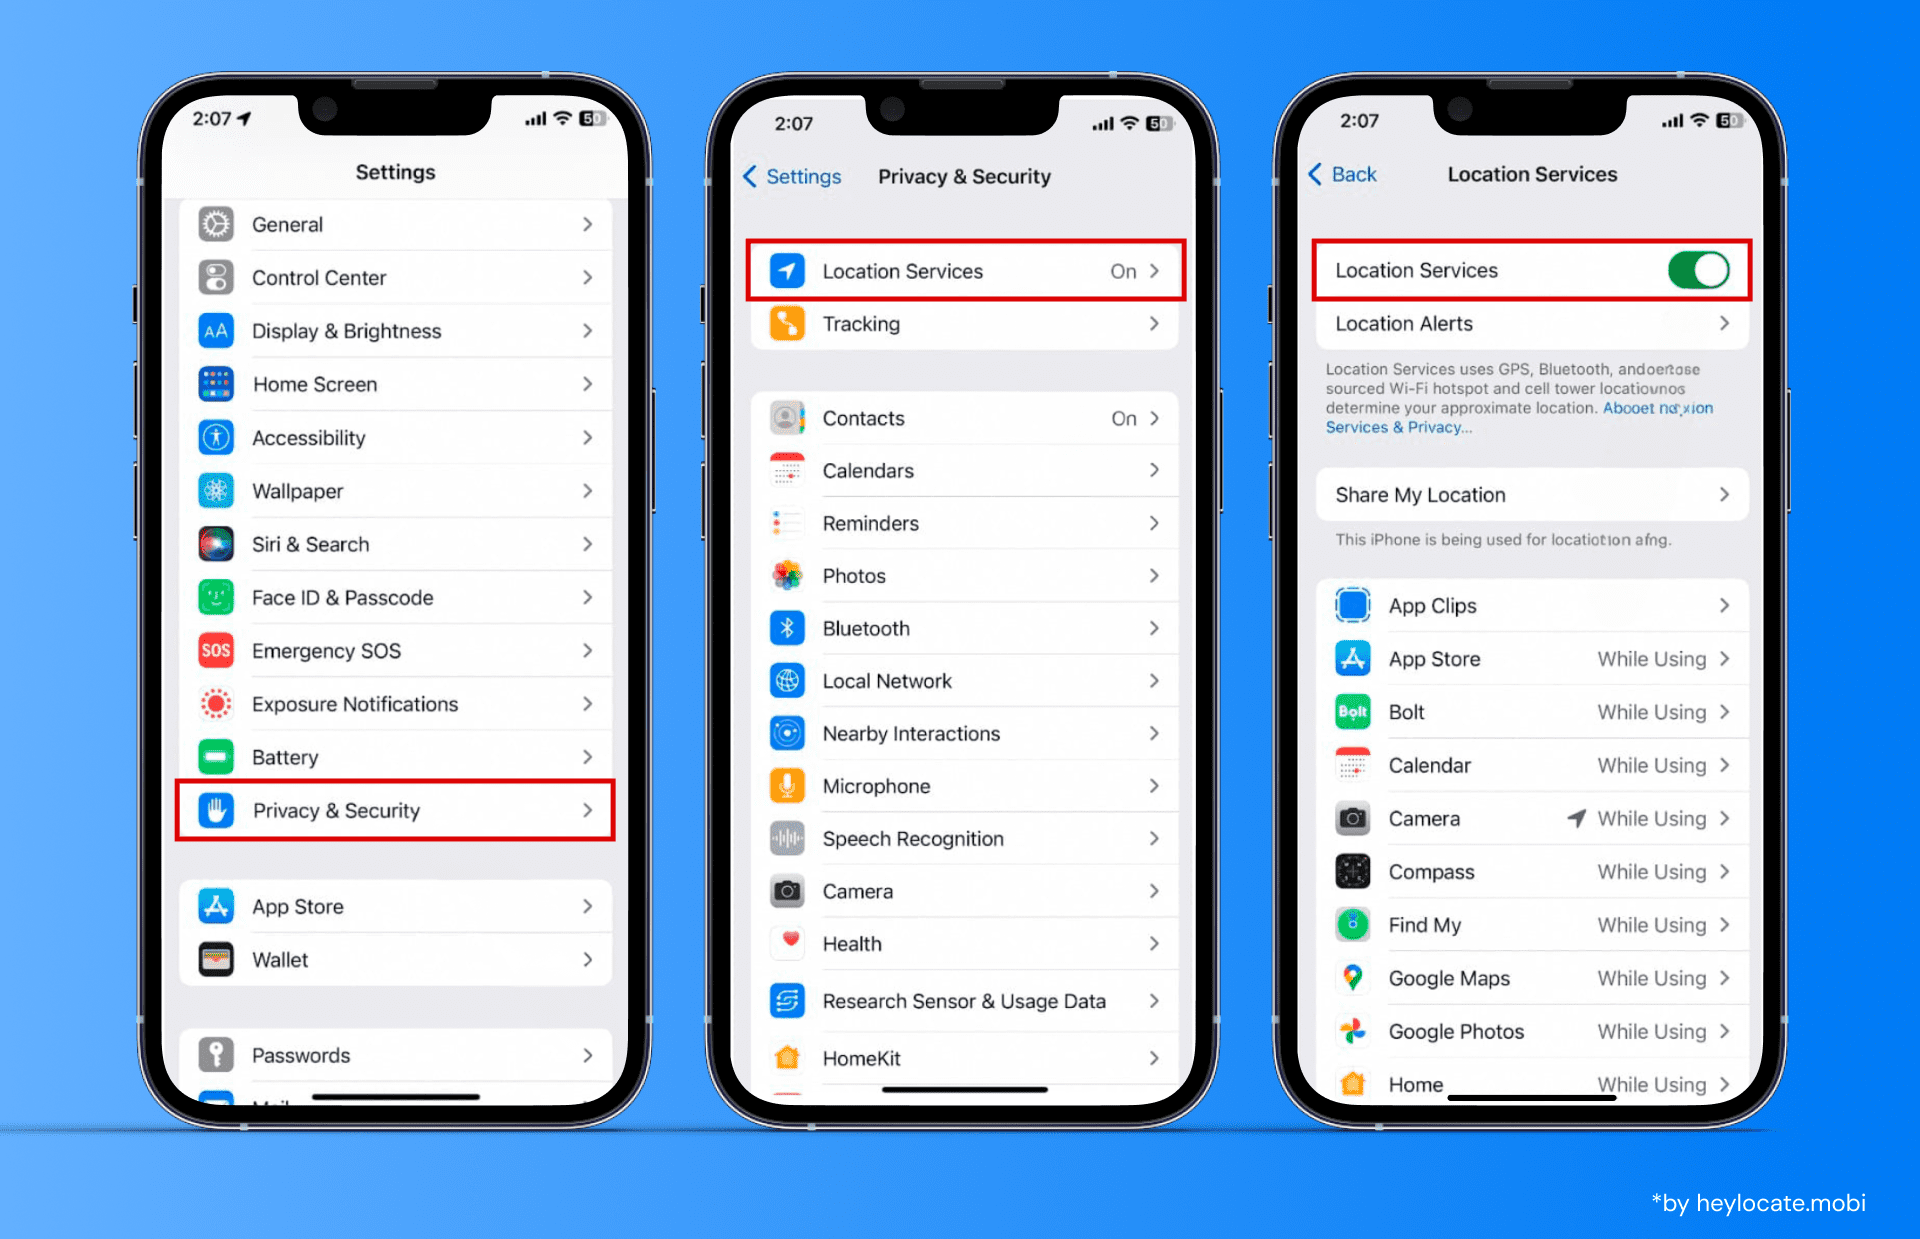 Three screenshots showing the steps to manage the Location Services settings on your smartphone: settings - privacy & security - Location Services (on/off)